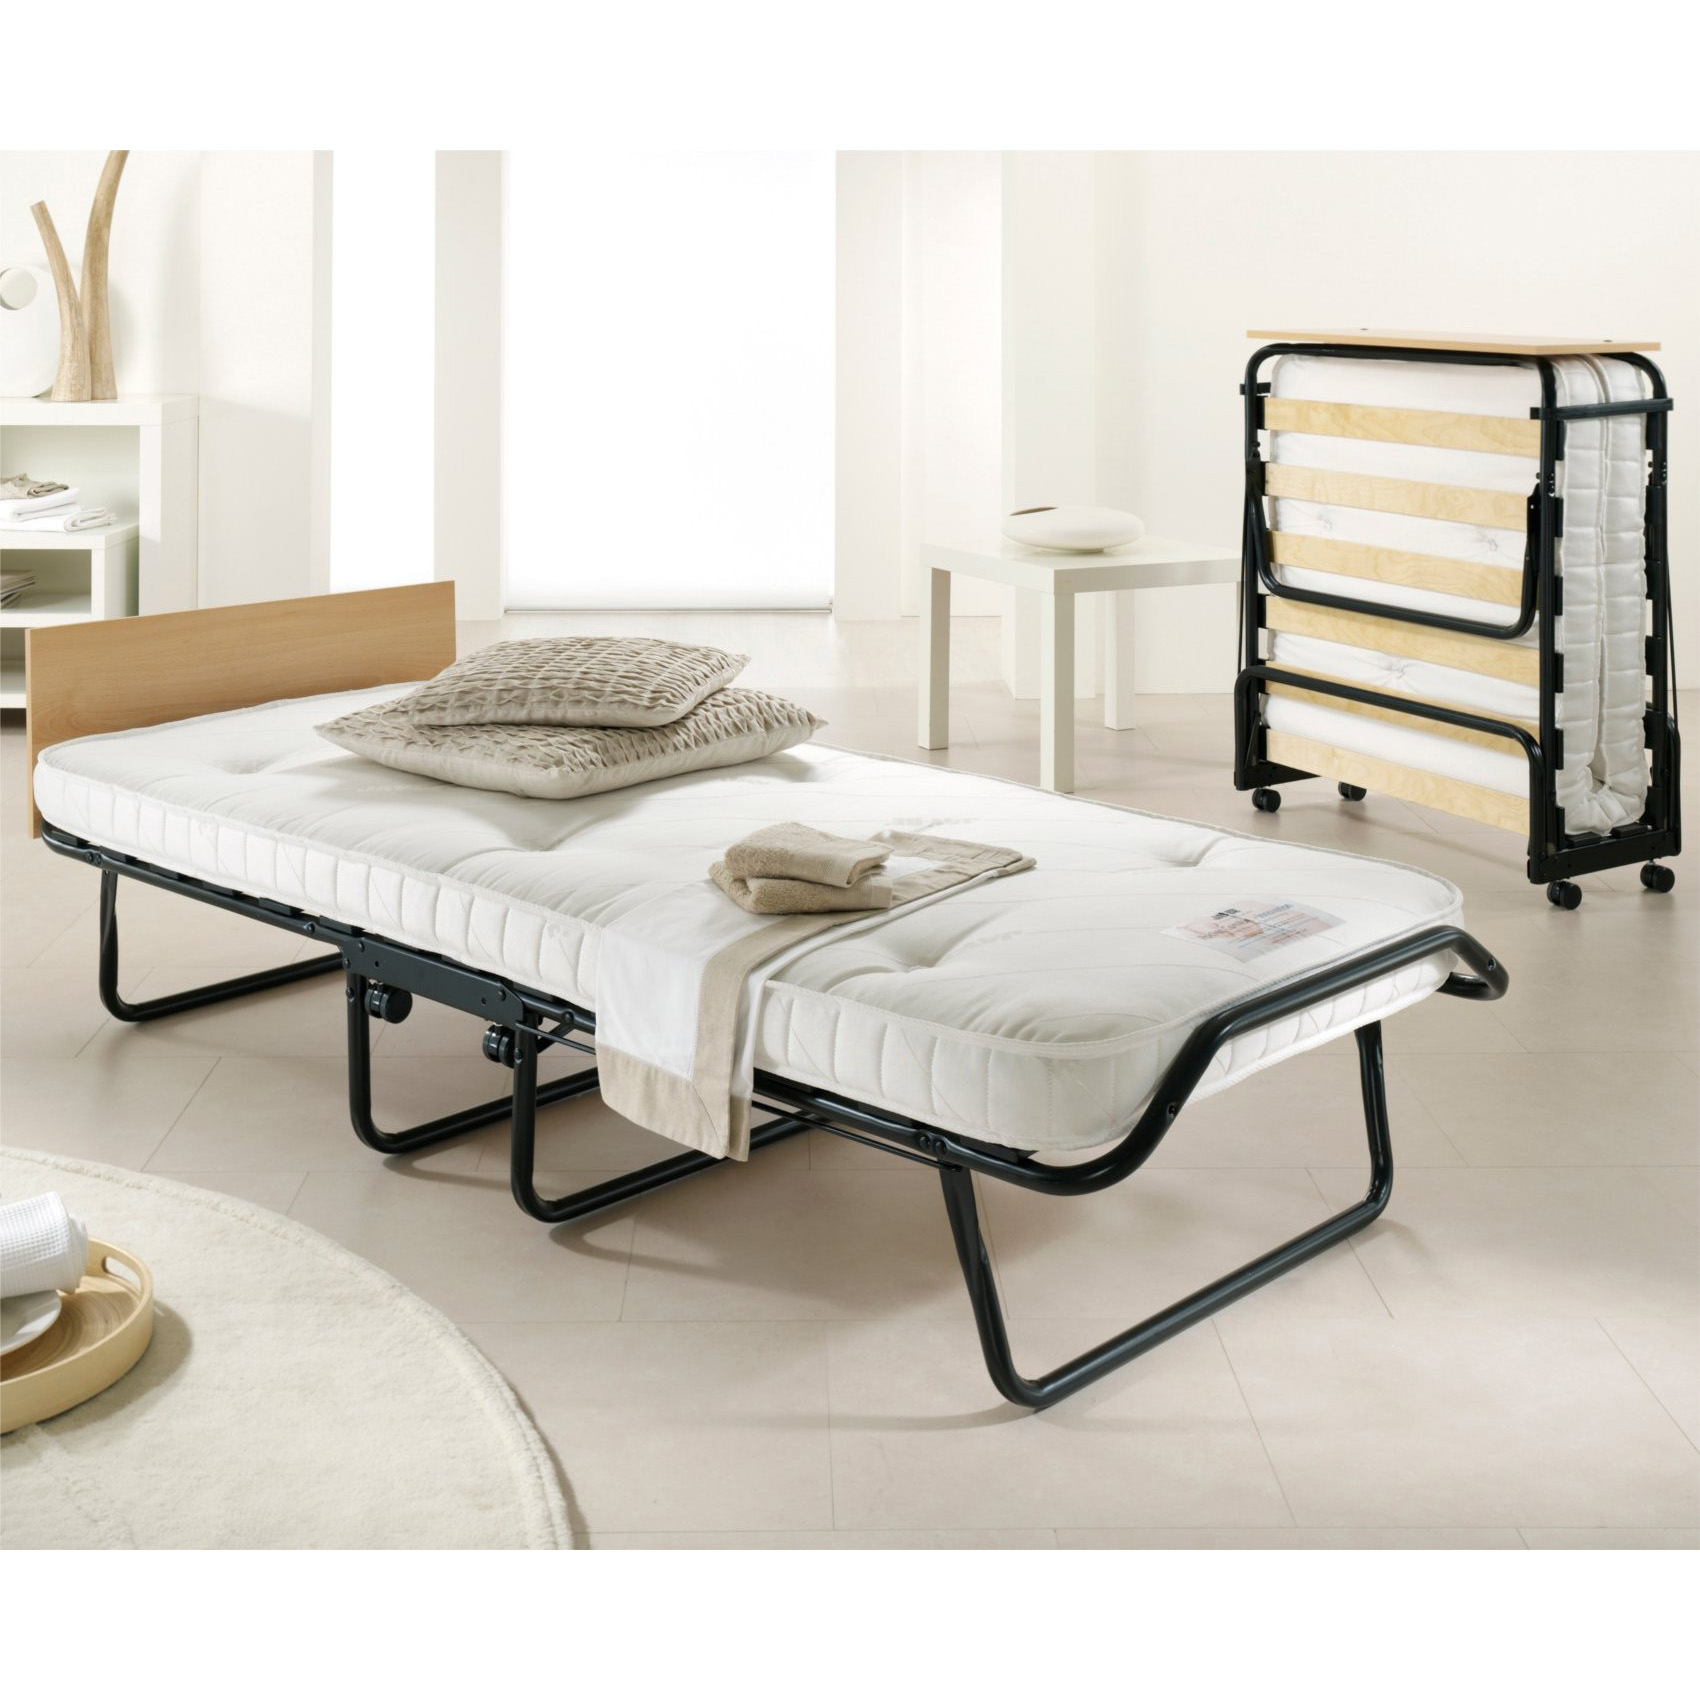 Fold Up Bed1 